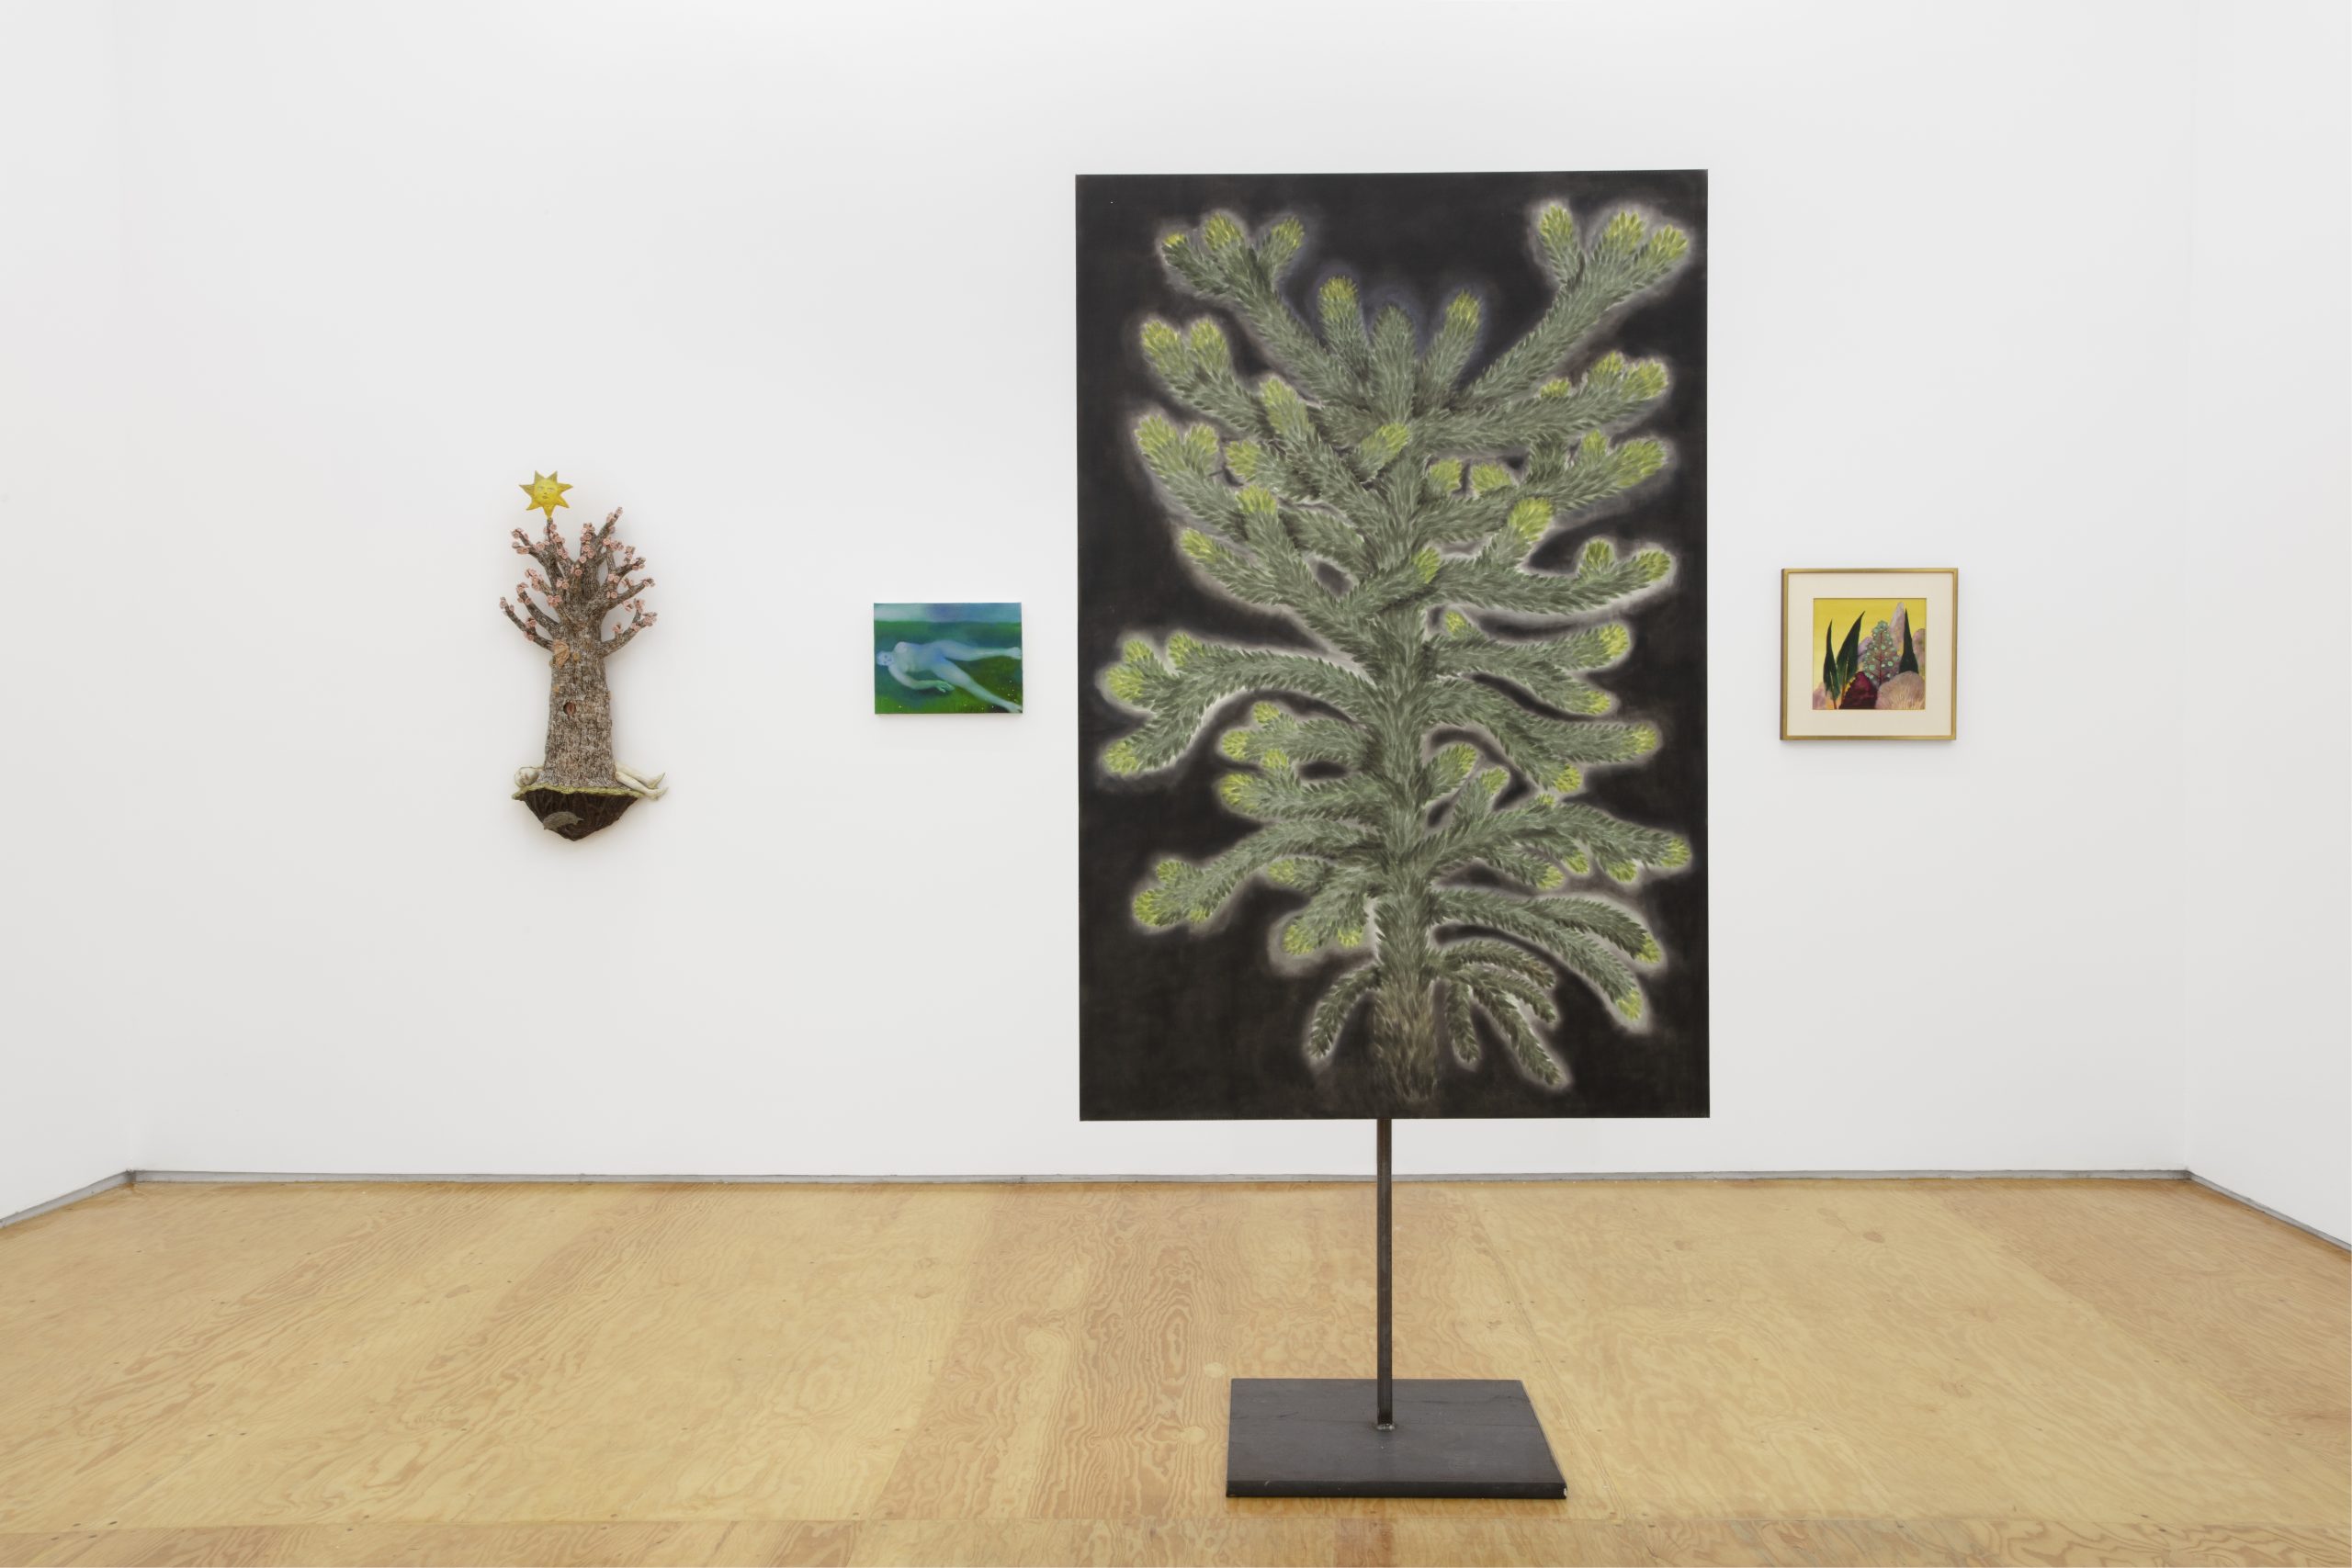 installation view with three paintings and one sculpture